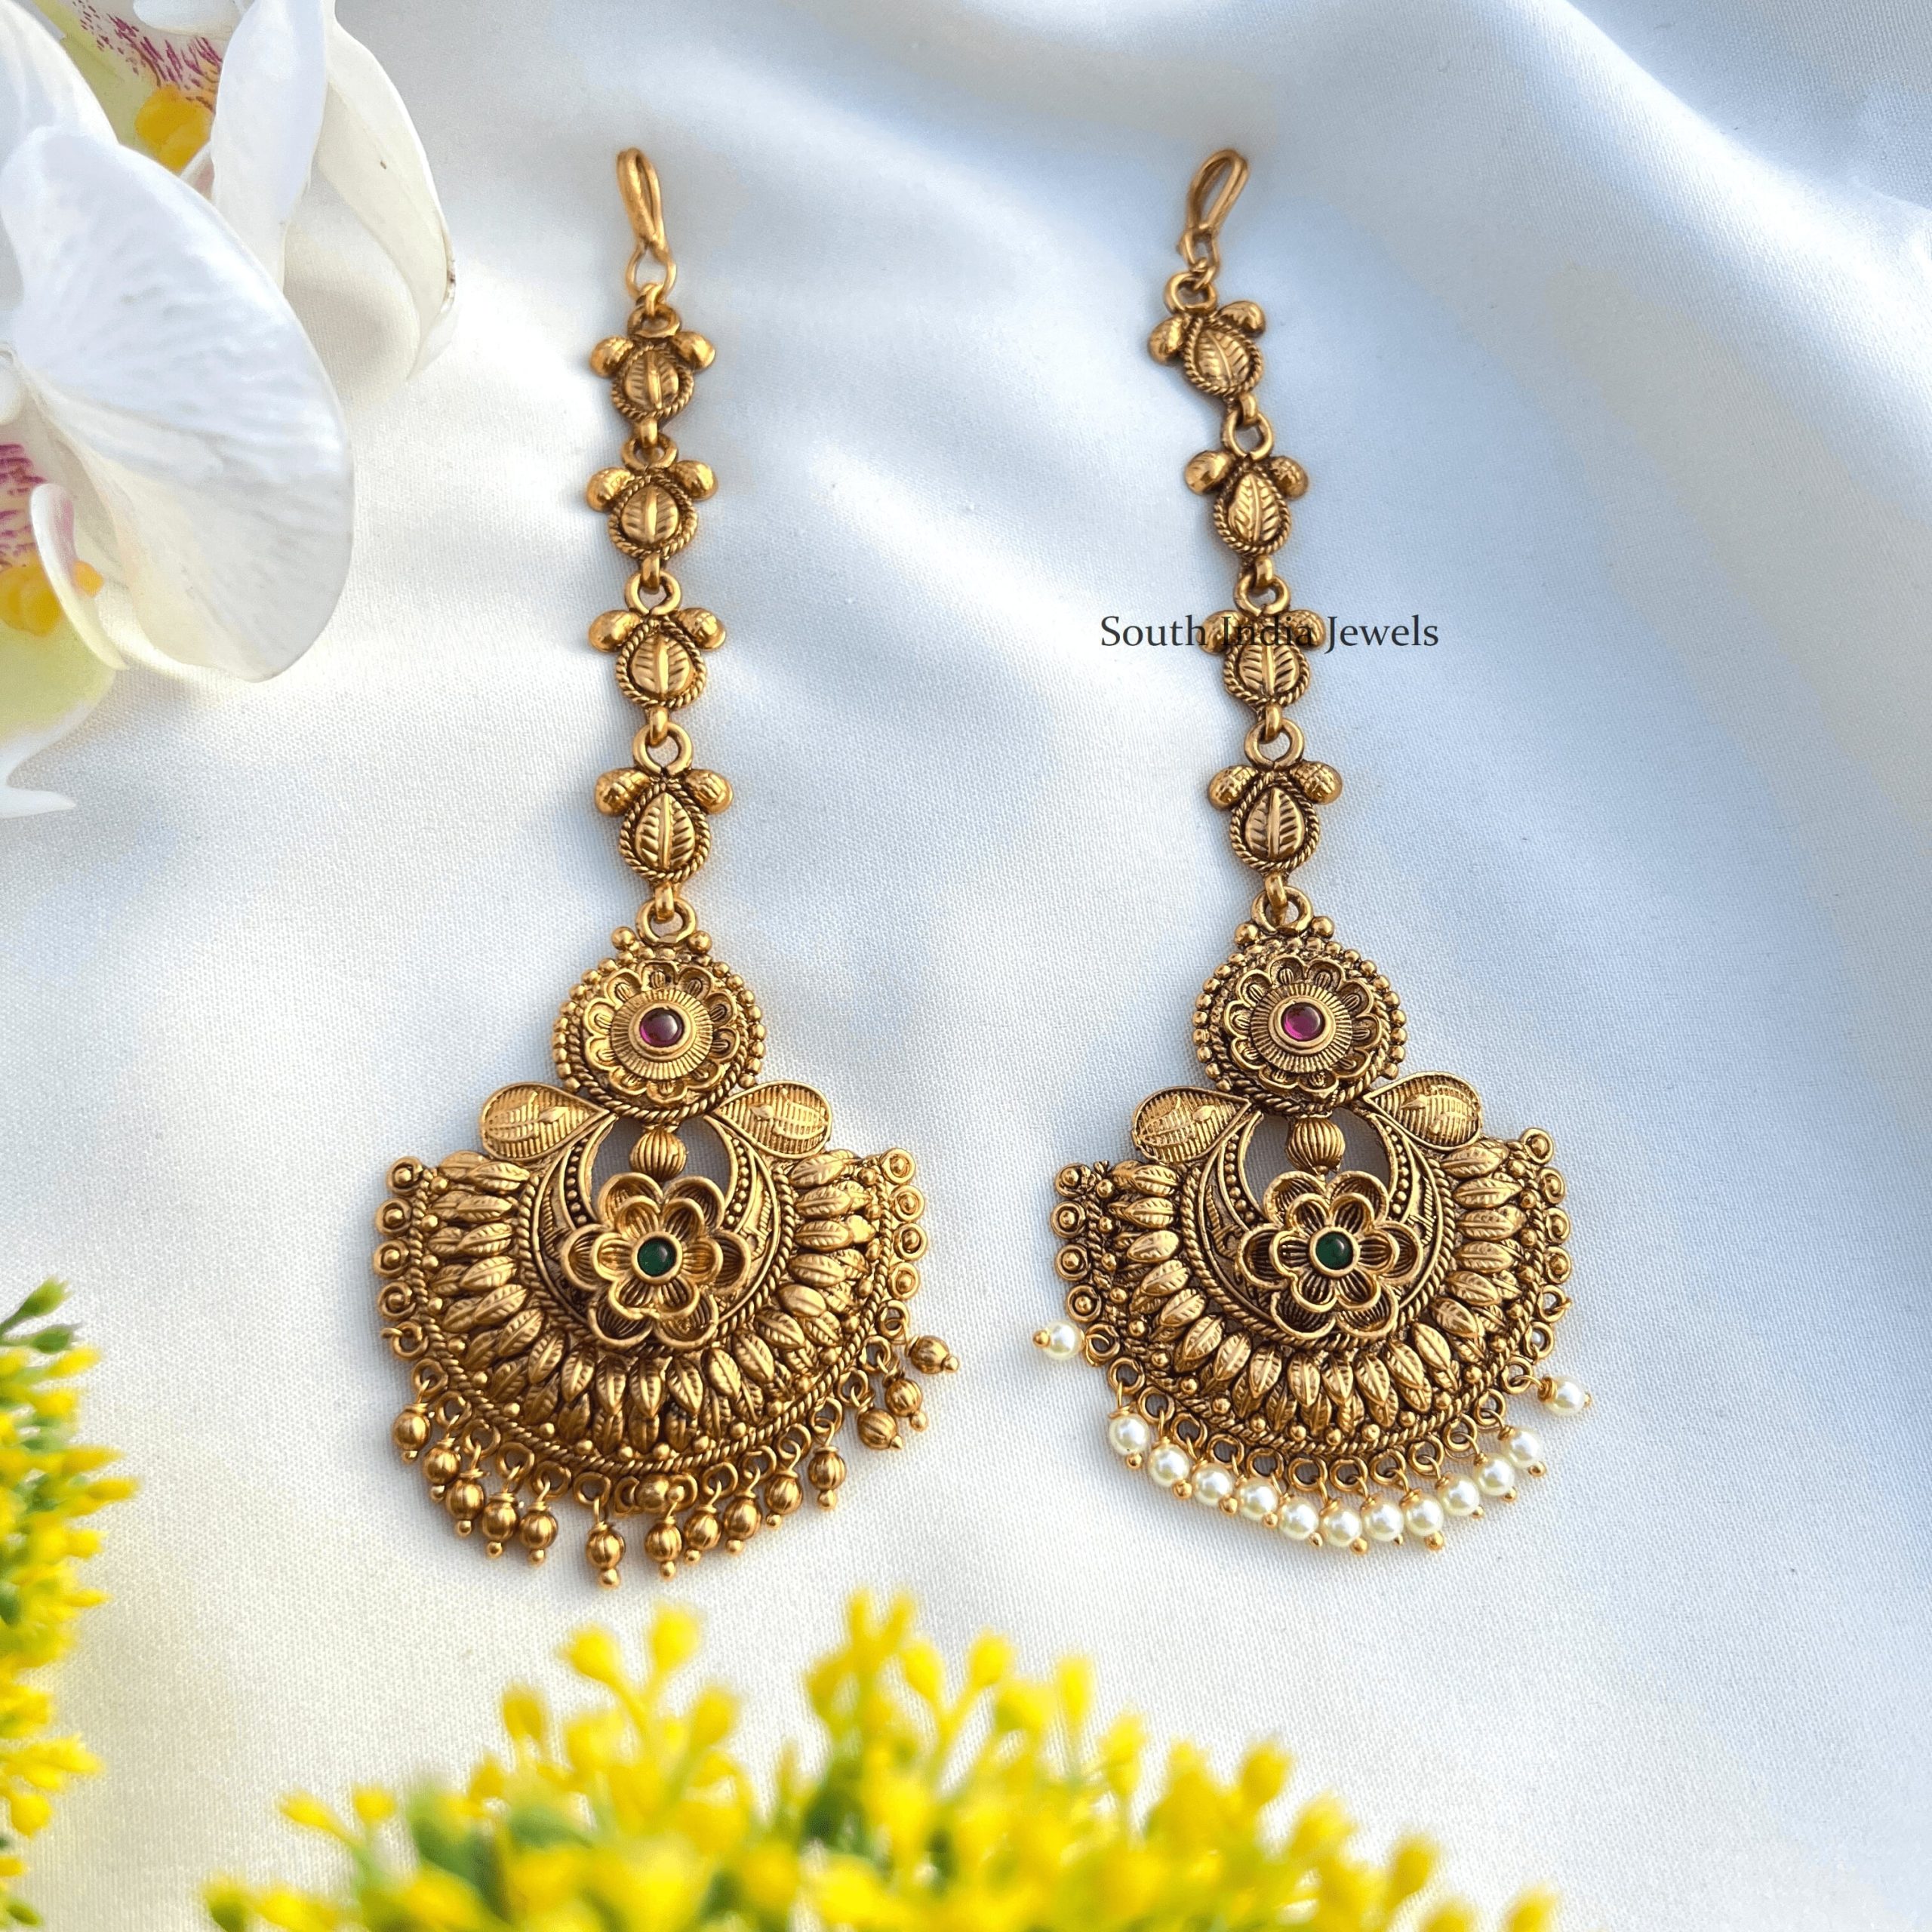 Chand Floral Maang Tikka South India Jewels - Online Shop